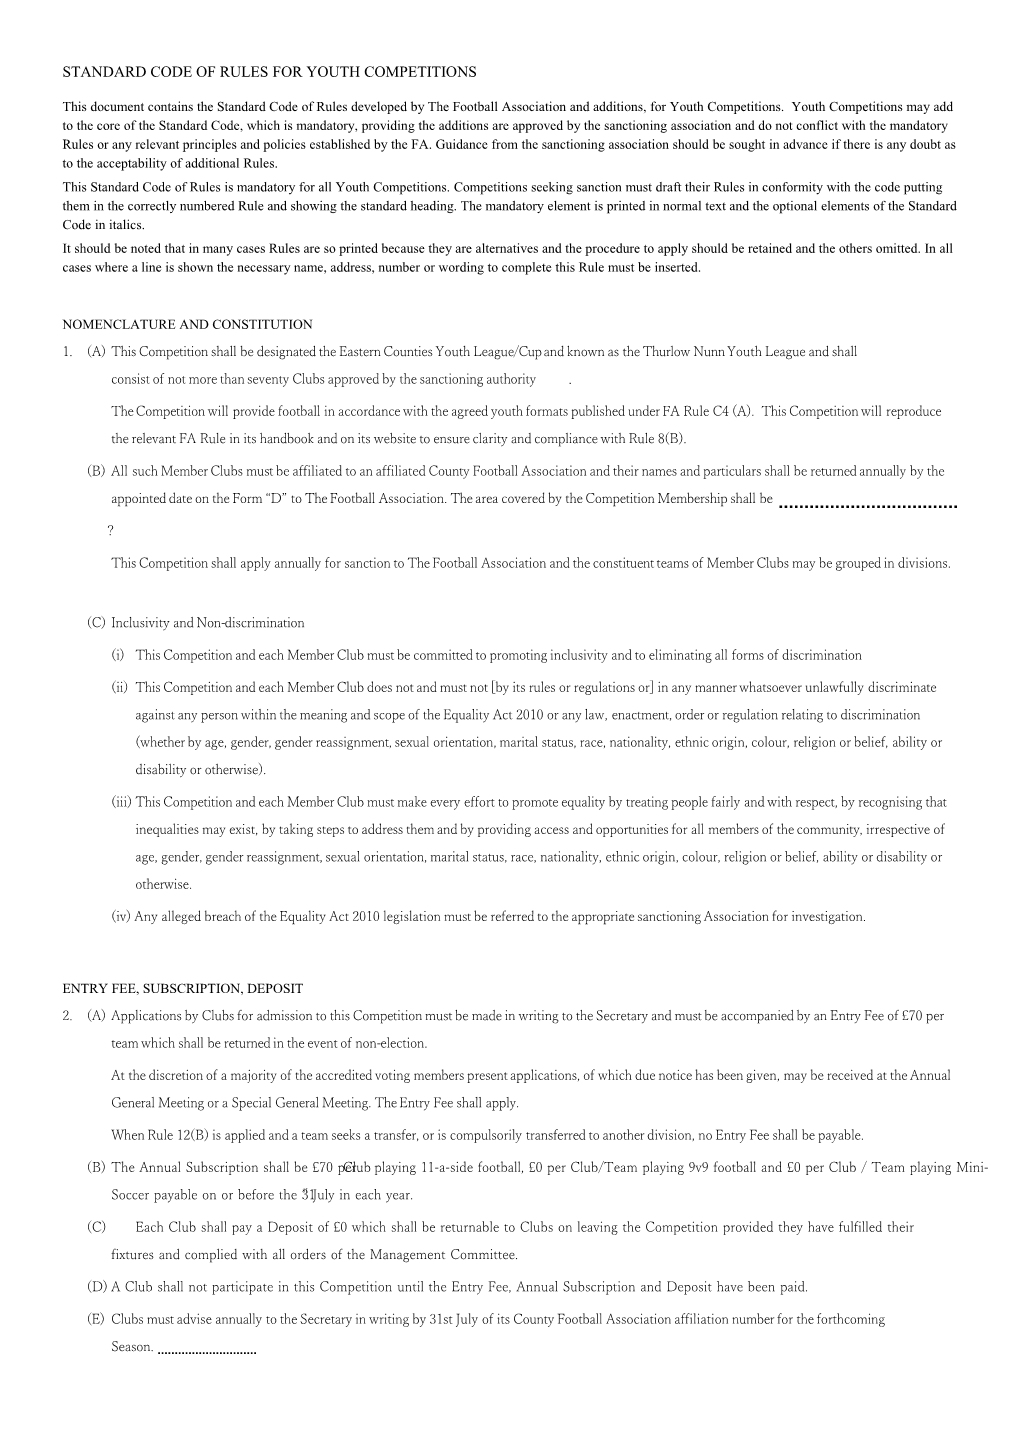 Standard Code of Rules for Youth Competitions